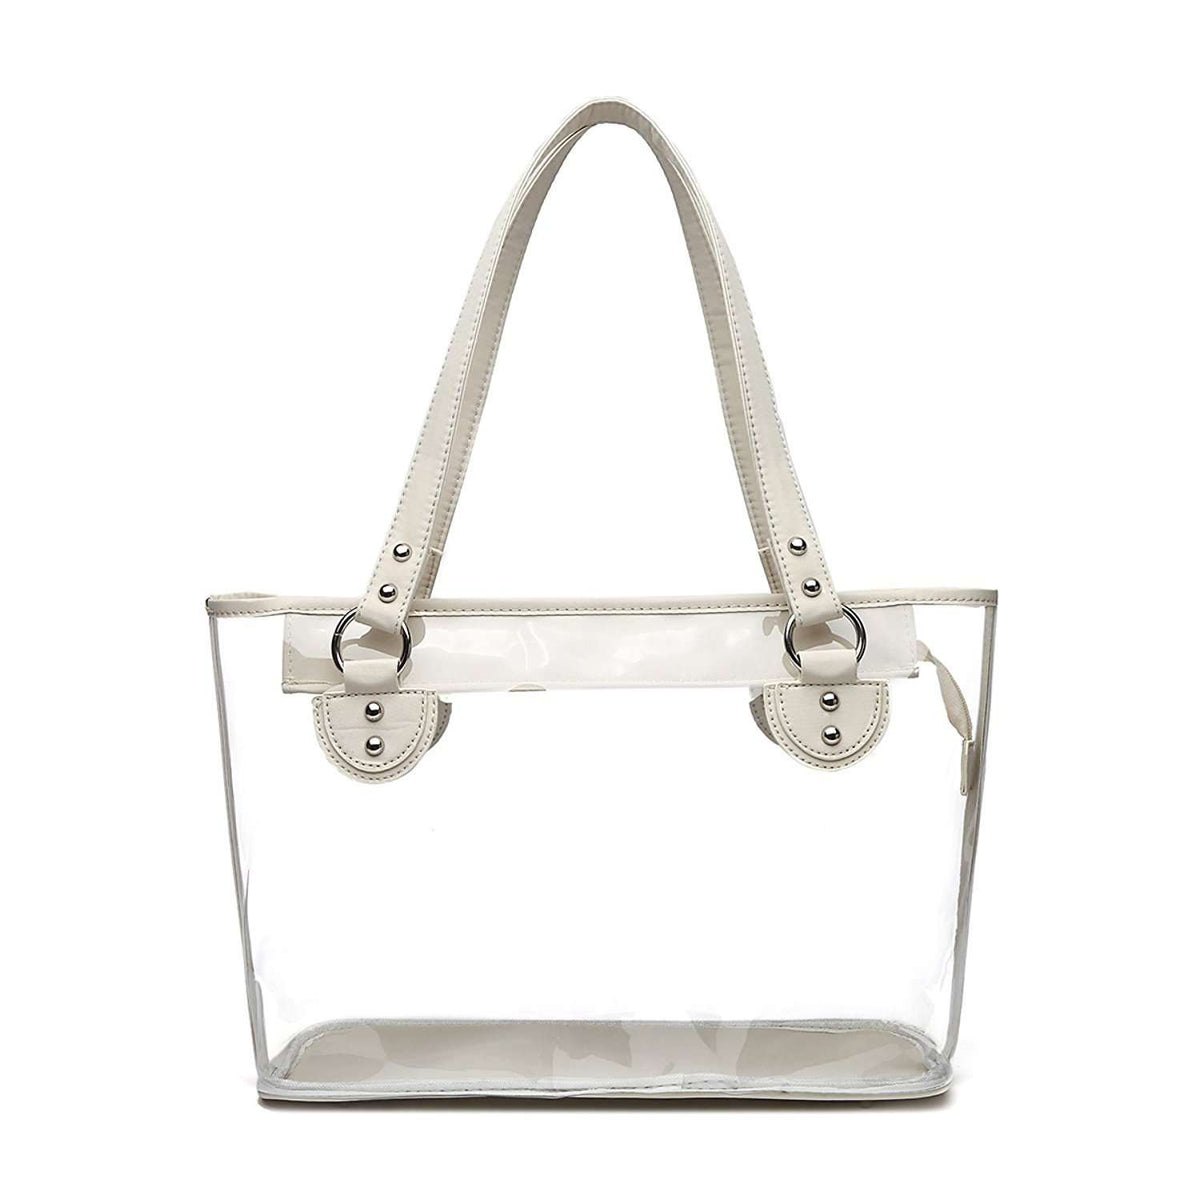 Designs by MyUtopia Shout Out:Deluxe Clear Tote Shoulder Bag - Large Zippered Compartment,Ivory,Handbag Purse